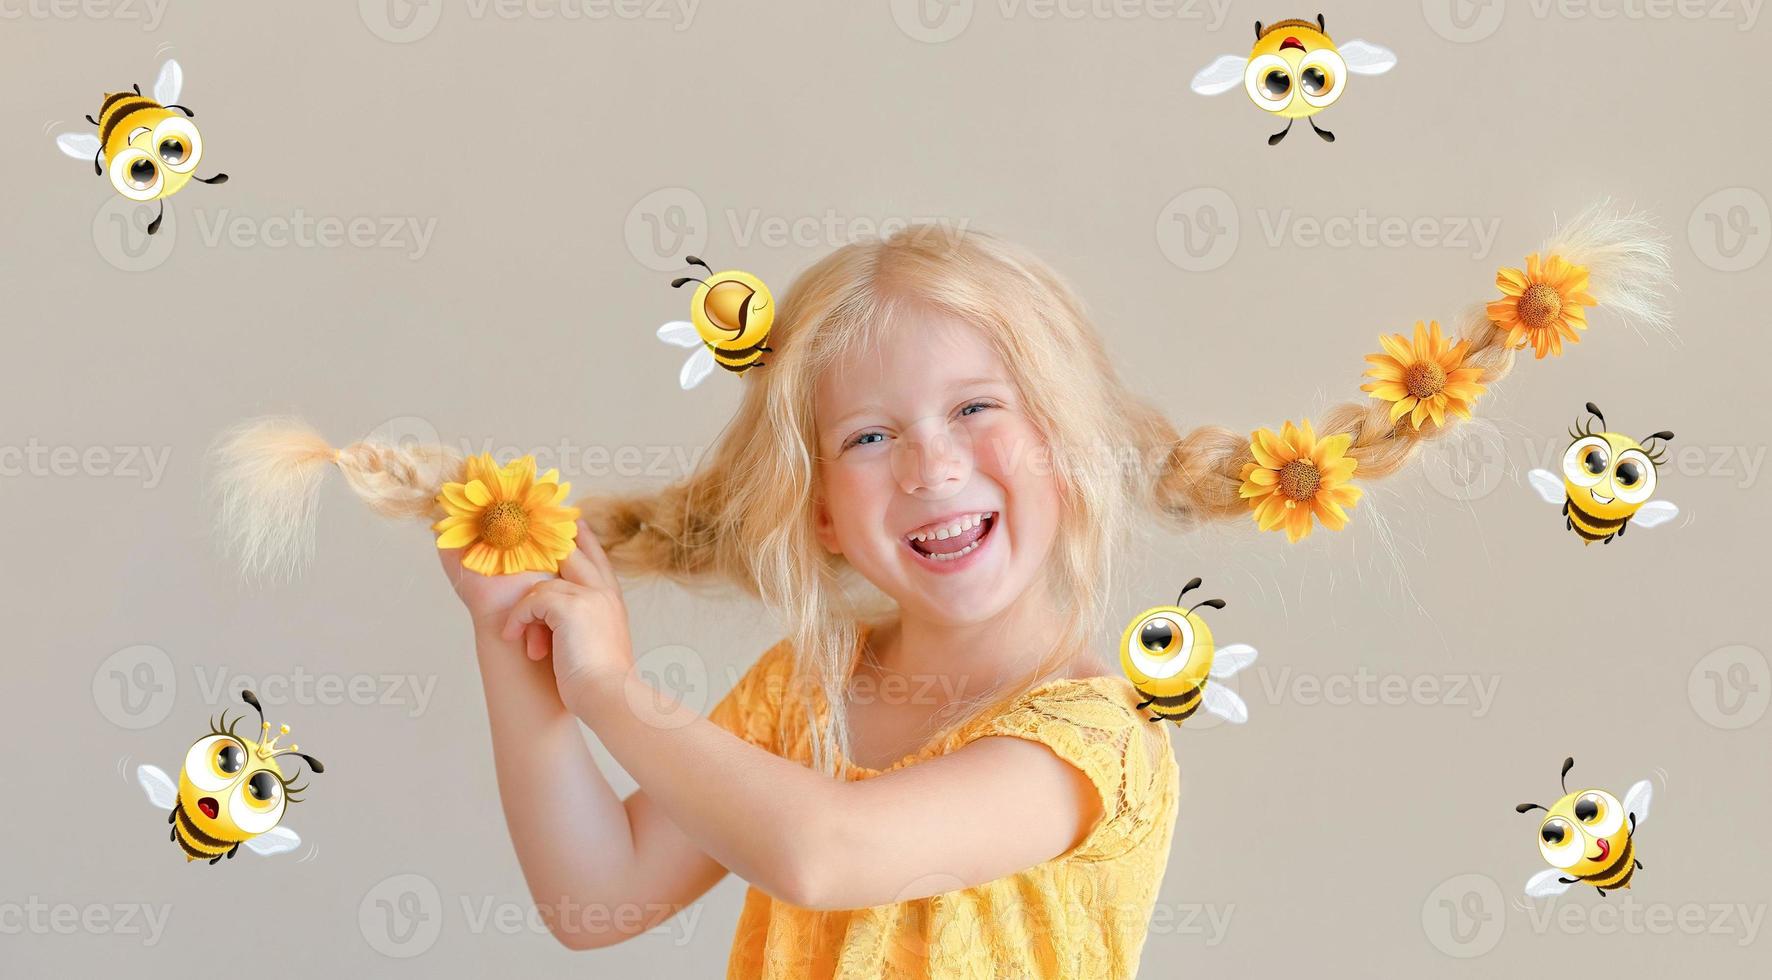 Laughing girl with yellow flowers in braids and cartoon bee photo